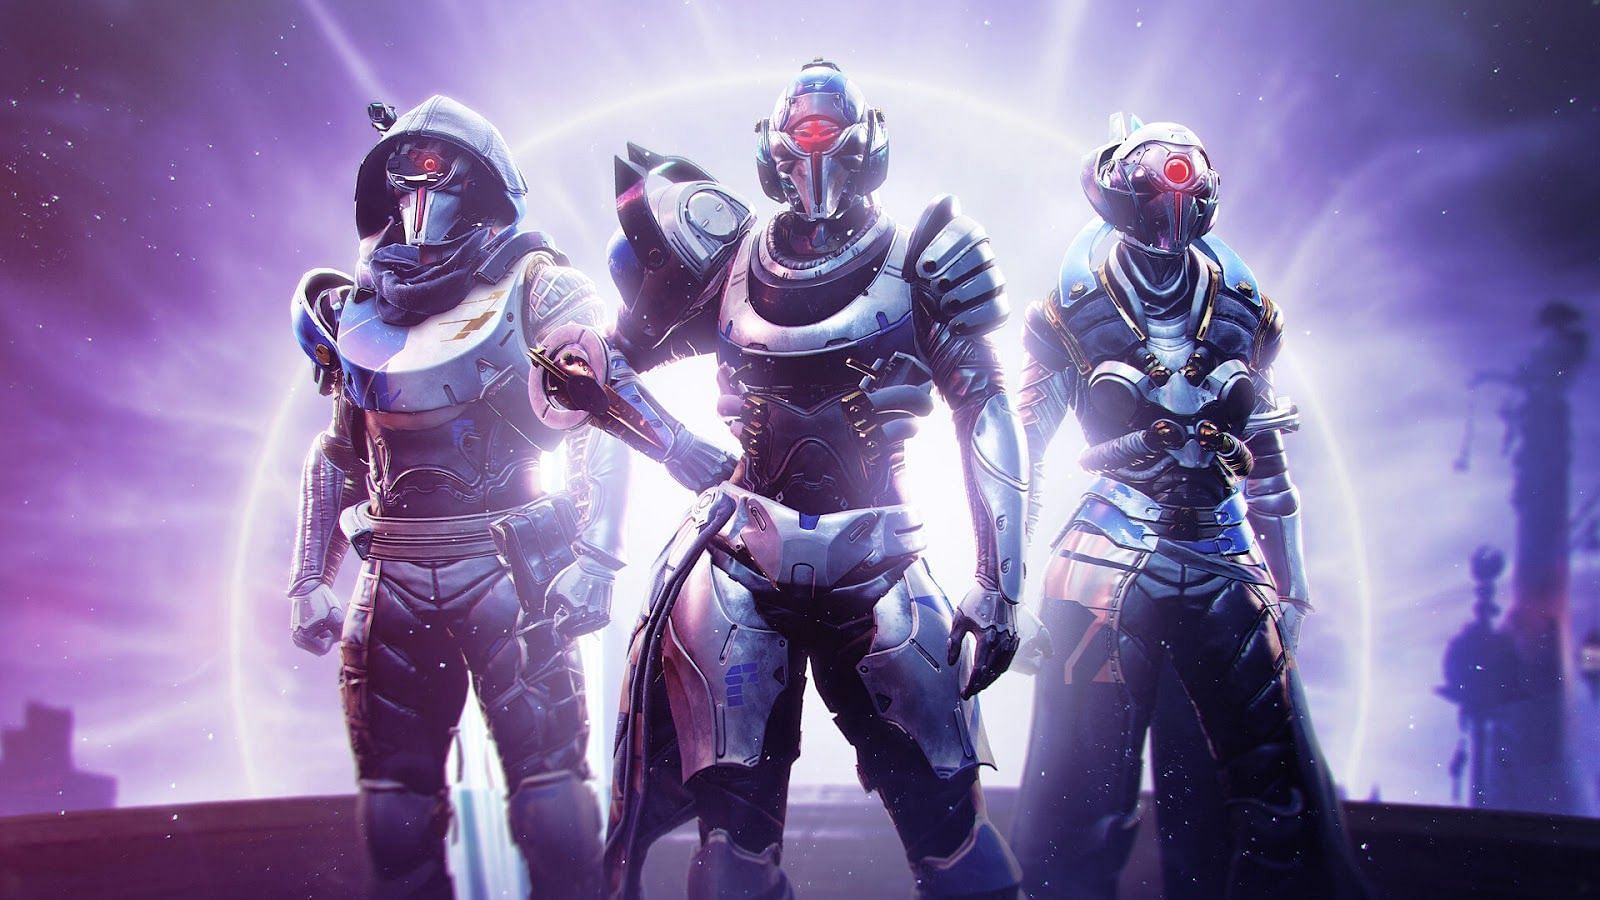 Destiny 2 brings a whole new season of challenges and Triumphs to fight for (Image via Bungie)